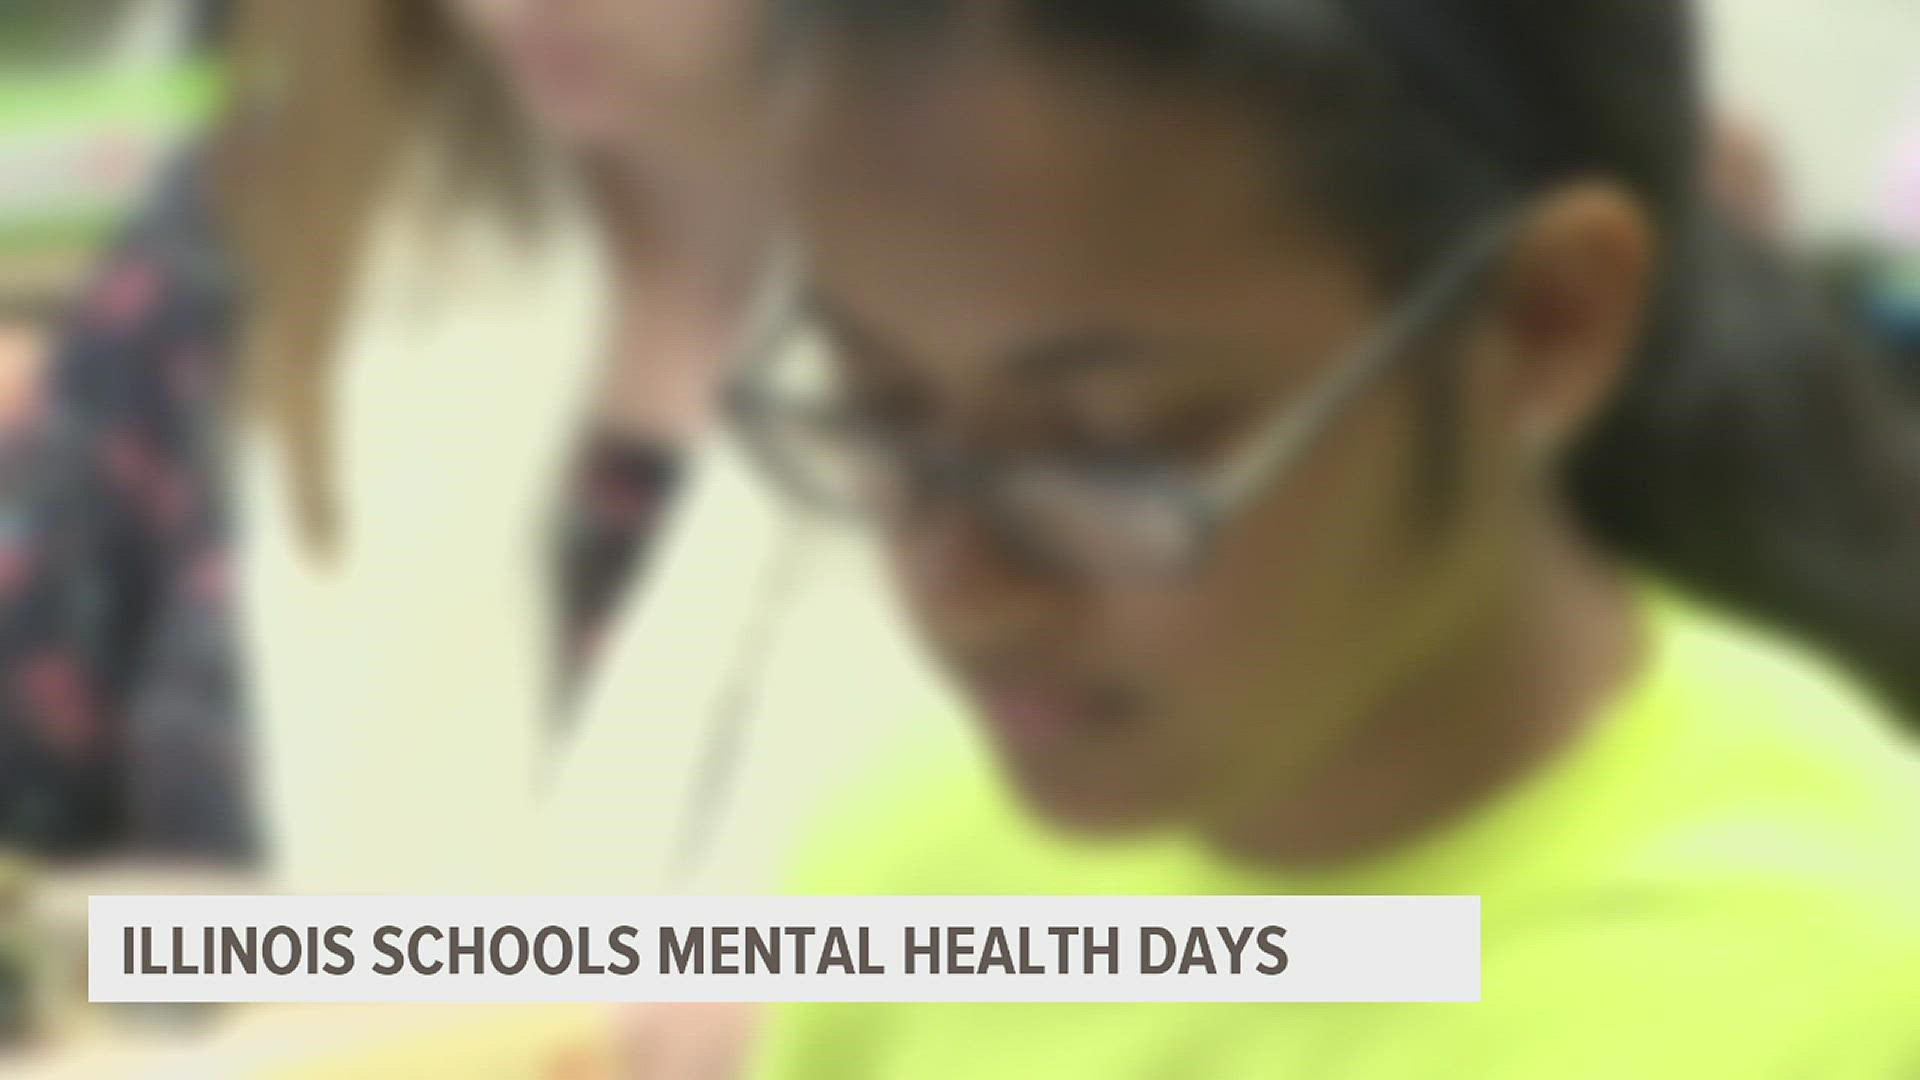 Illinois began allowing all public school students to take 5 mental health days per year. Here's how students used them when they were first offered.